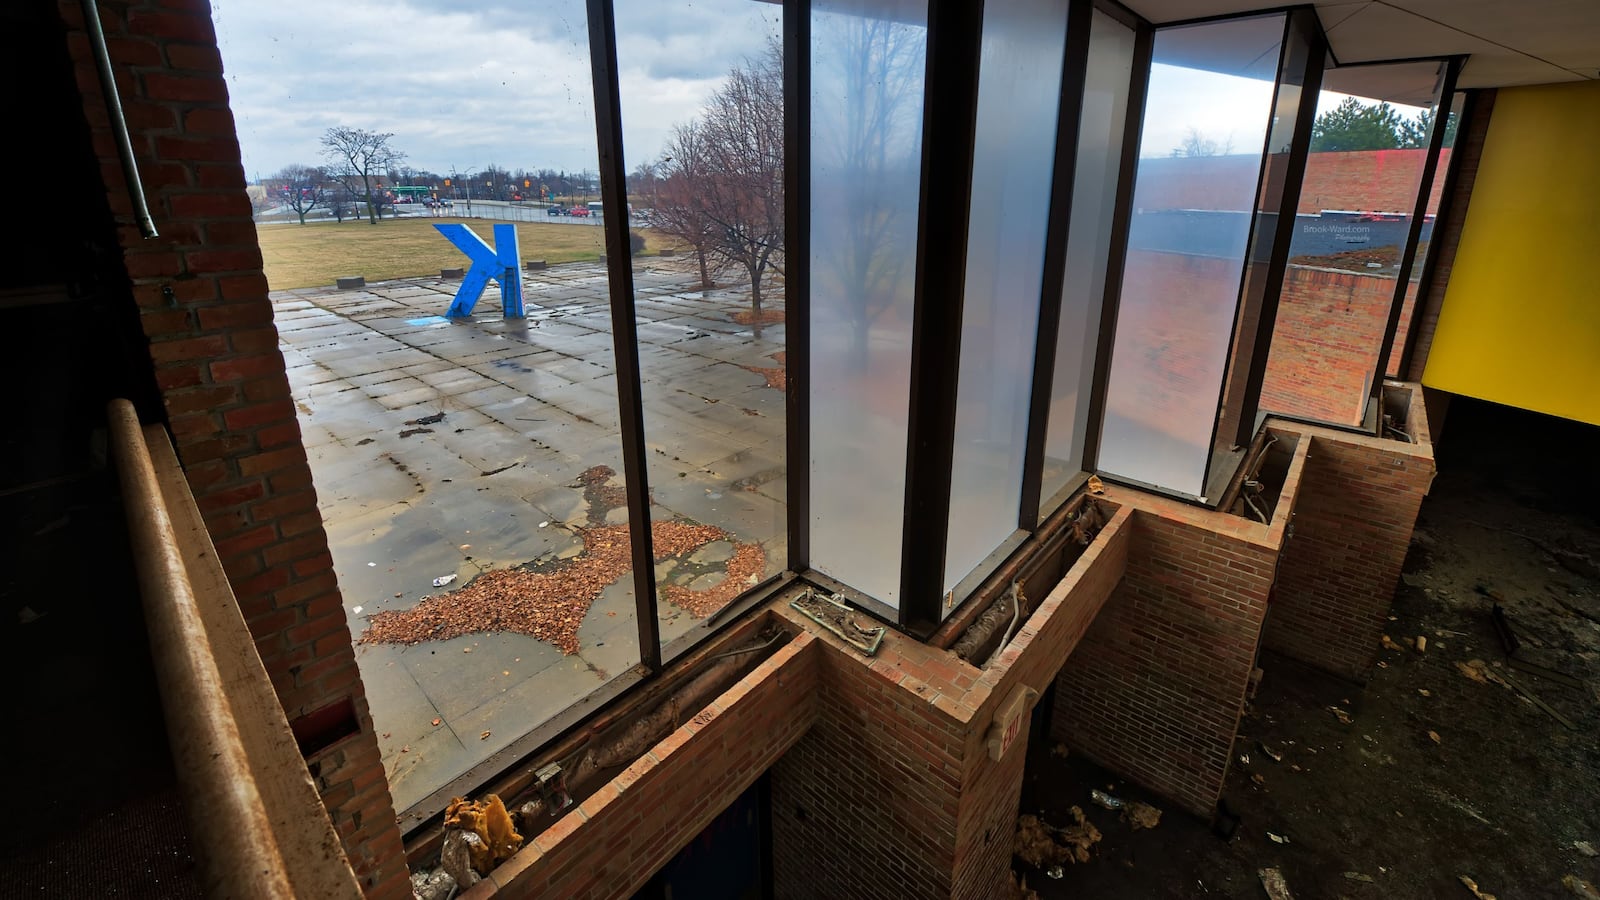 A view from inside the closed Kettering High School shows the big blue "K" that sits outside the building.